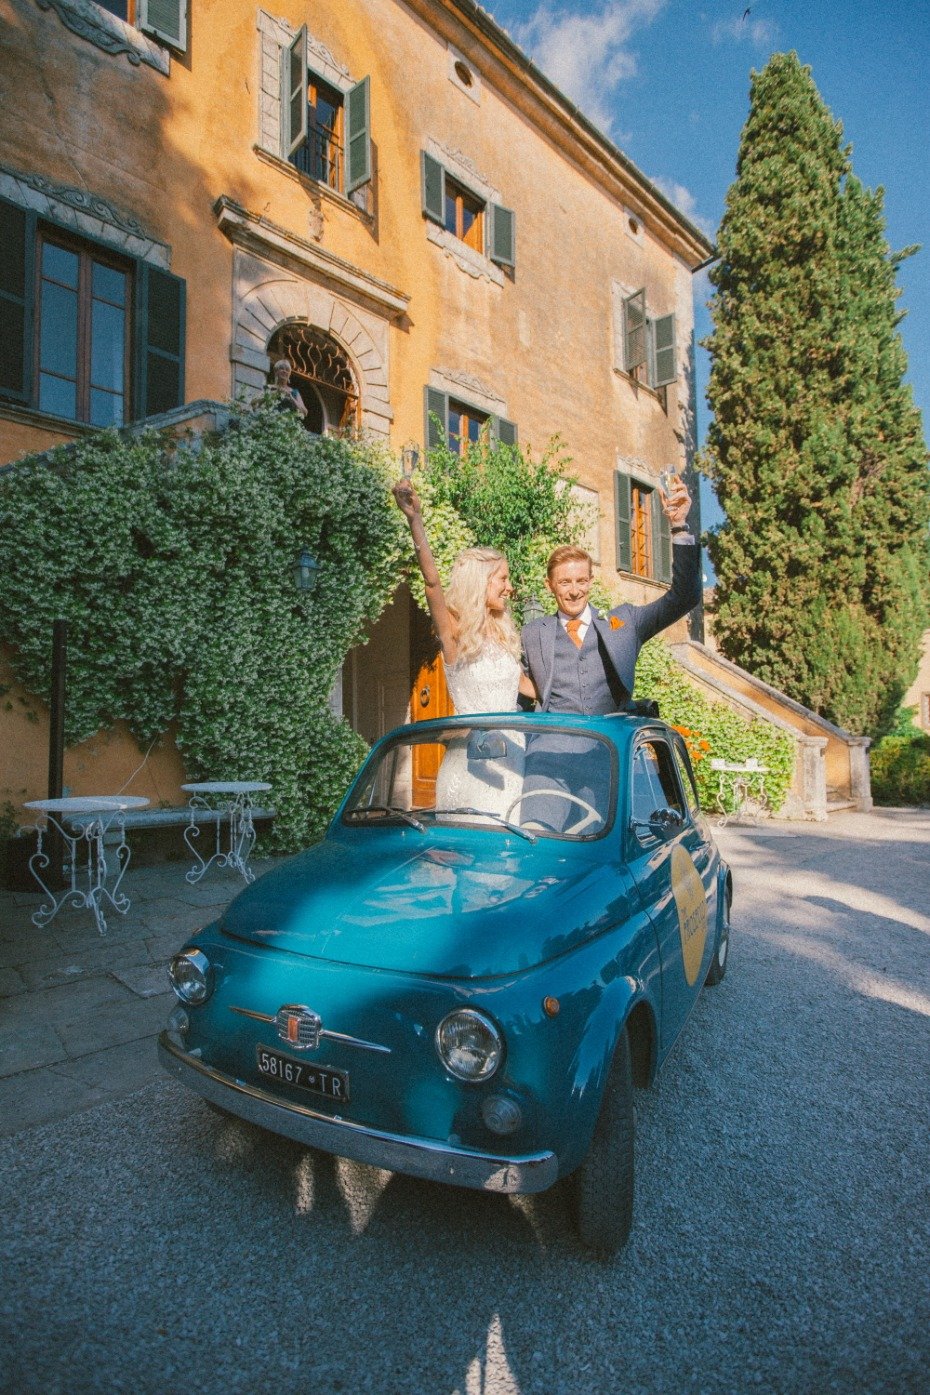 how to get married in Tuscany